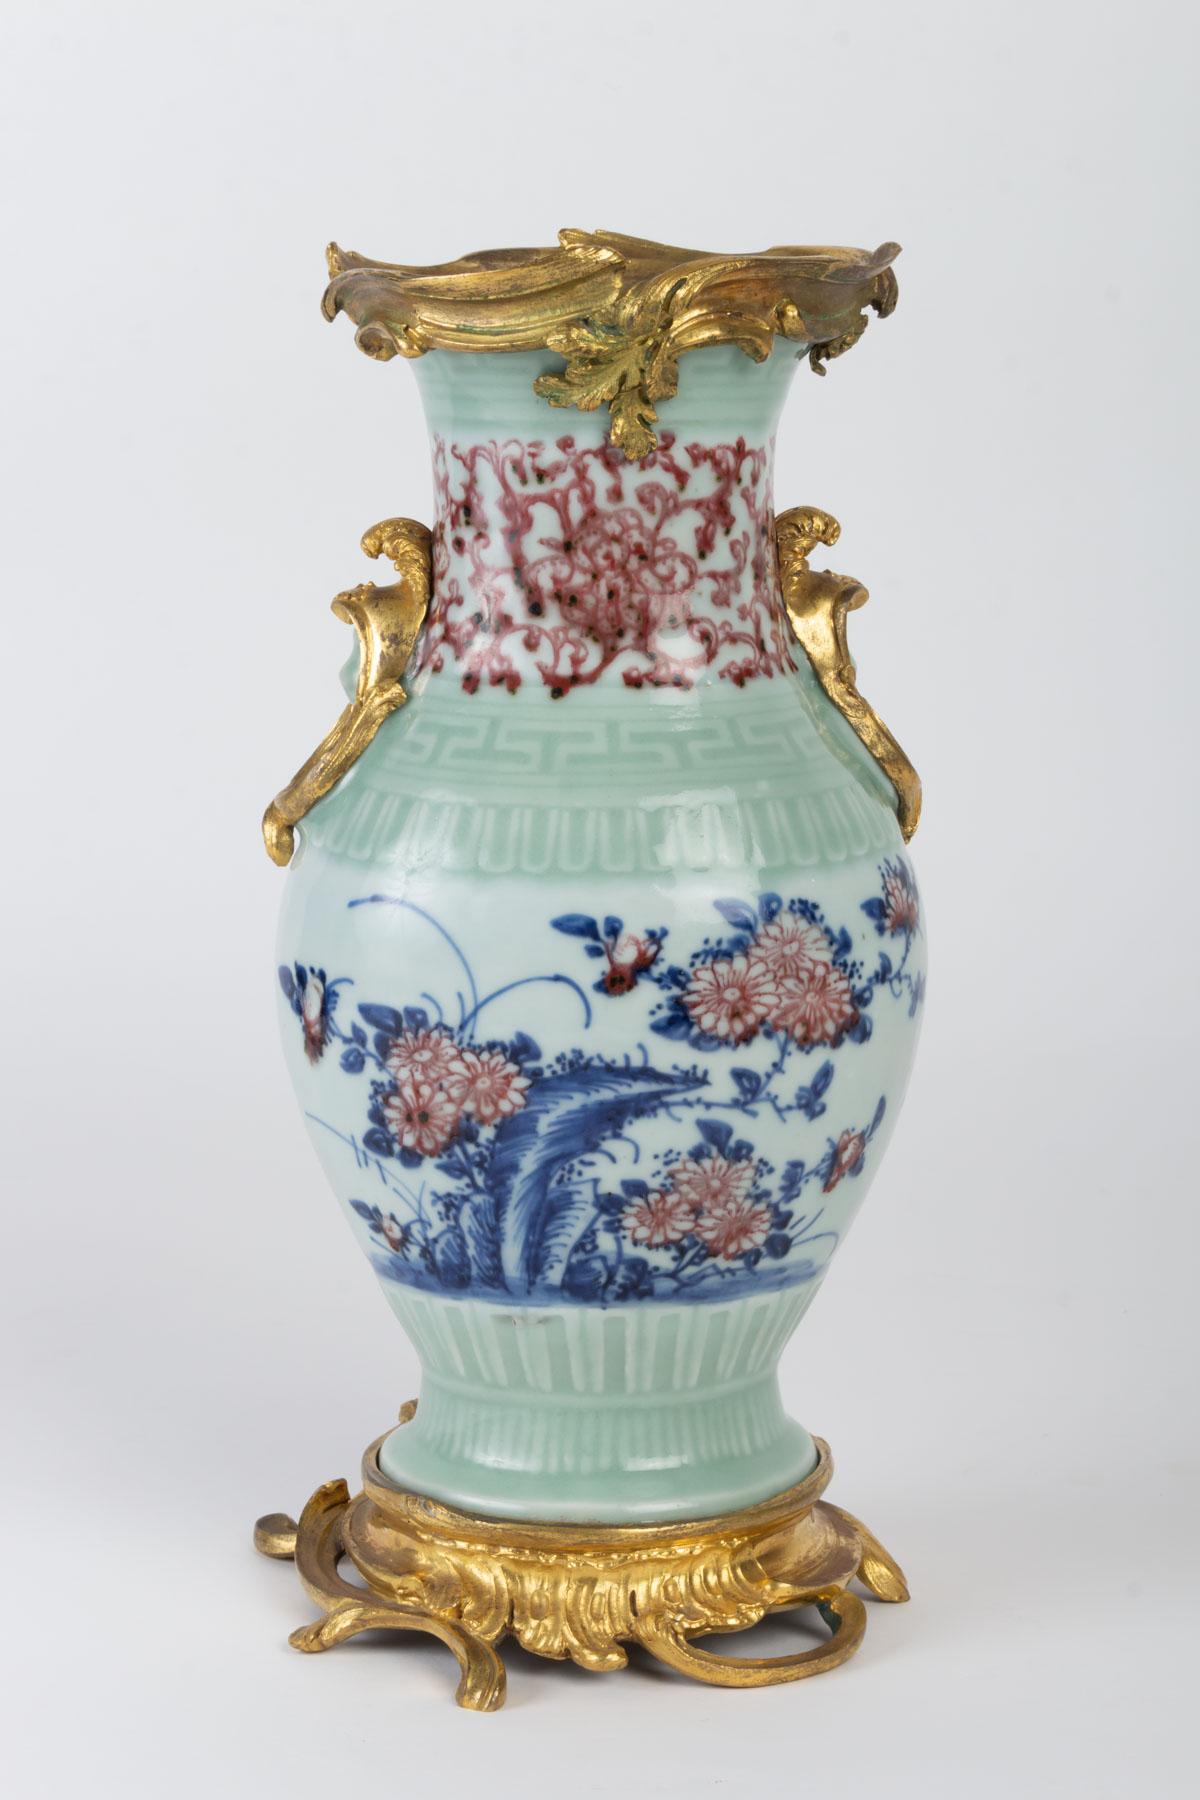 18th Century and Earlier Mounted Porcelain Vase, Gilt Bronze and Chiselled, 18th Century